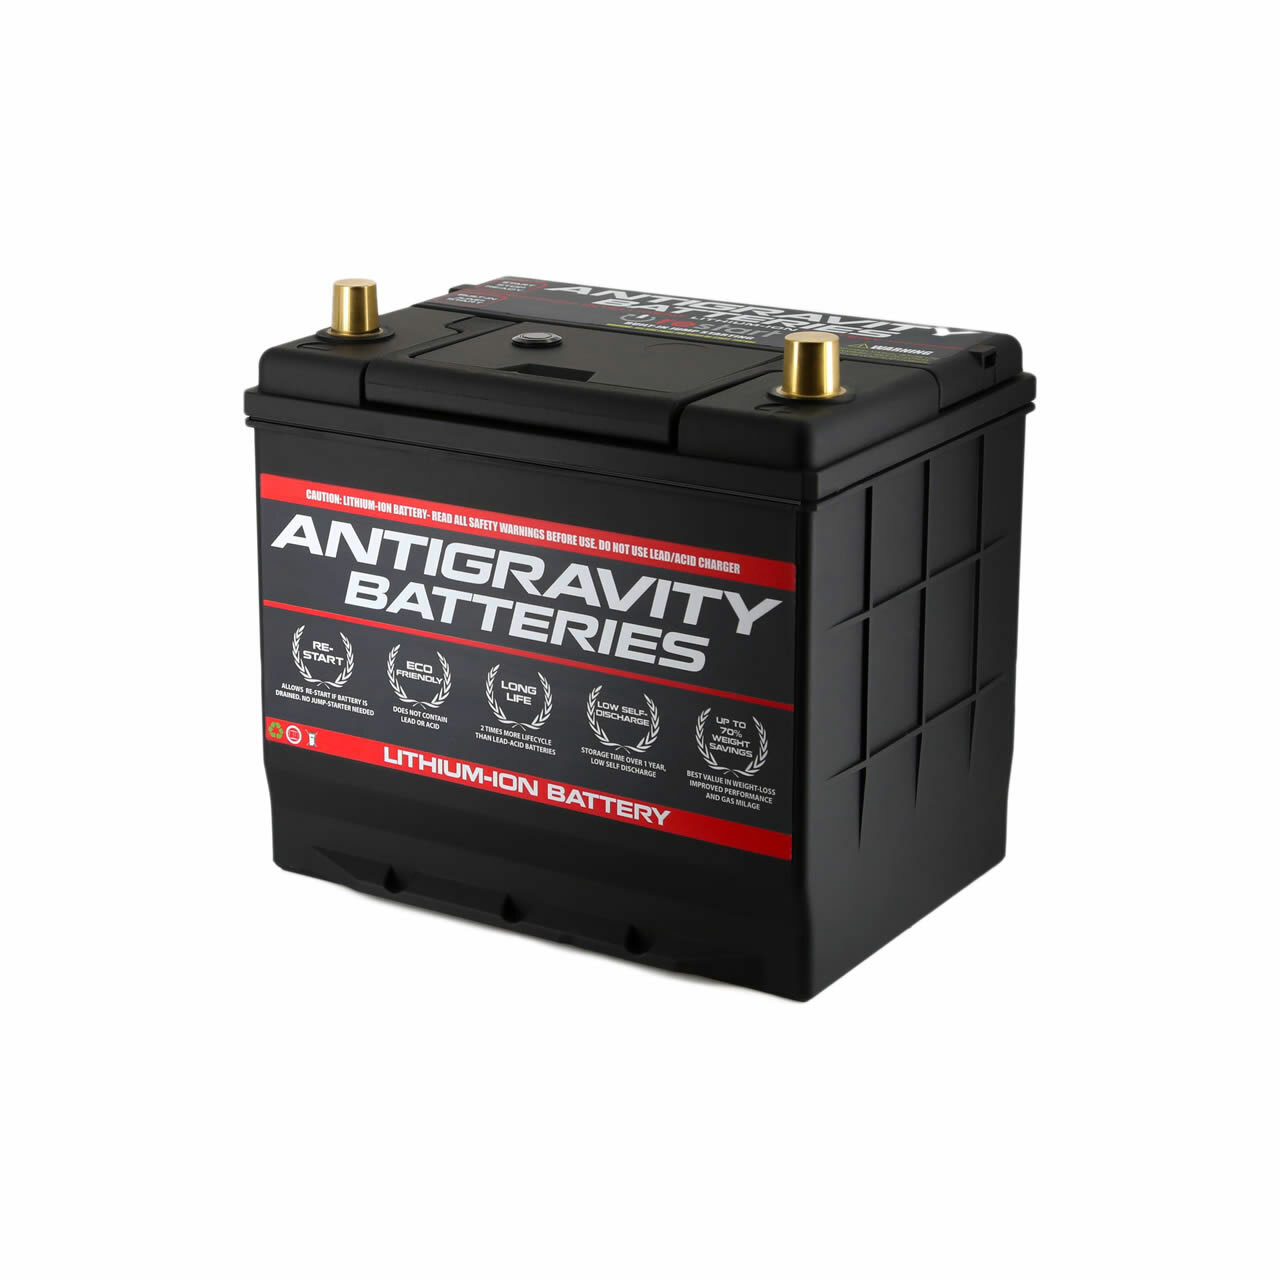 Antigravity Lithium Car Battery - Group-35/Q85 - Product Image